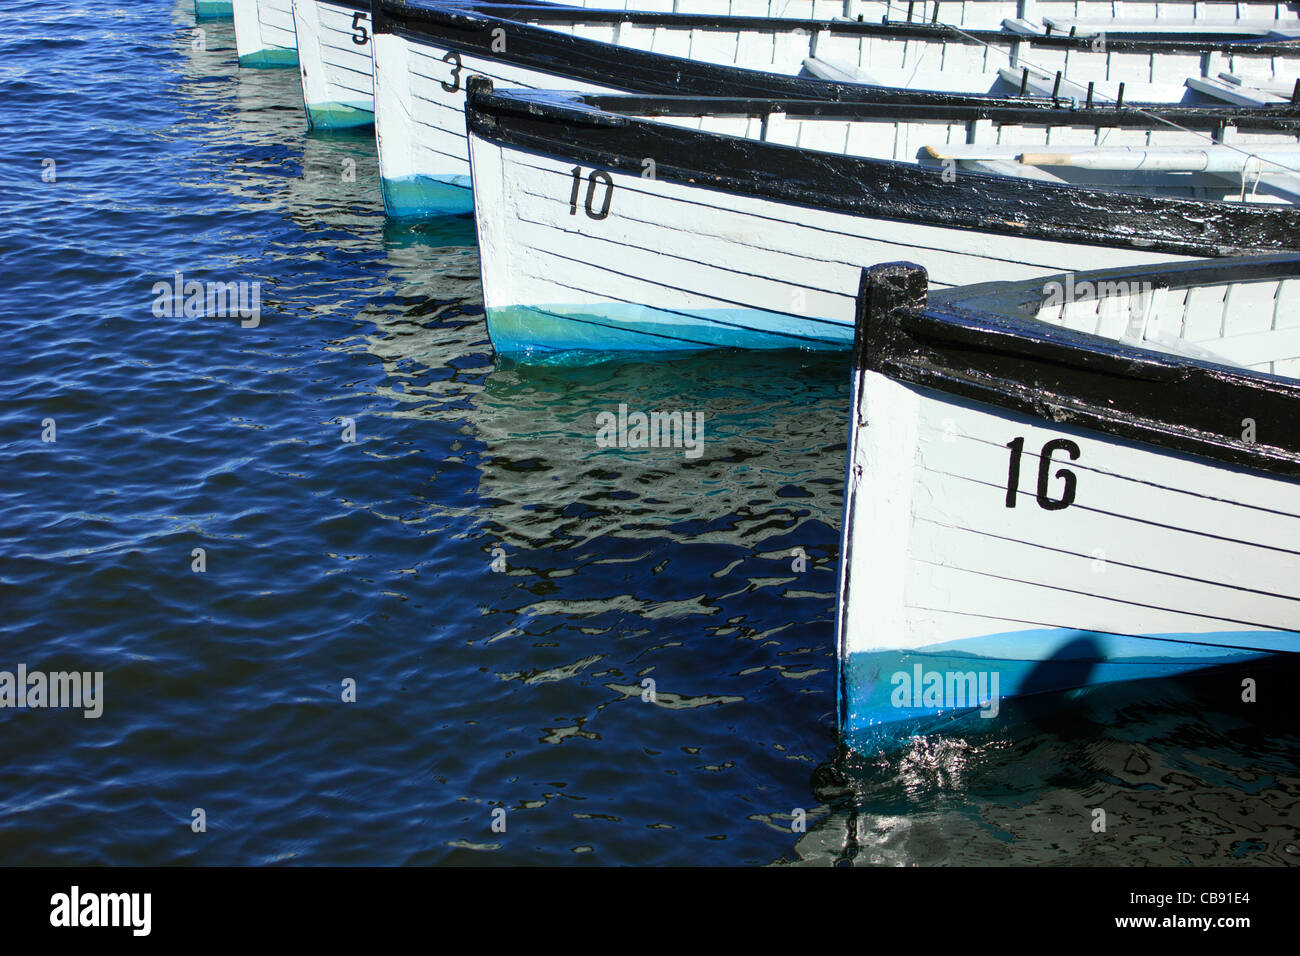 A row of numbered boats on one of the Scottish Lochs. Stock Photo